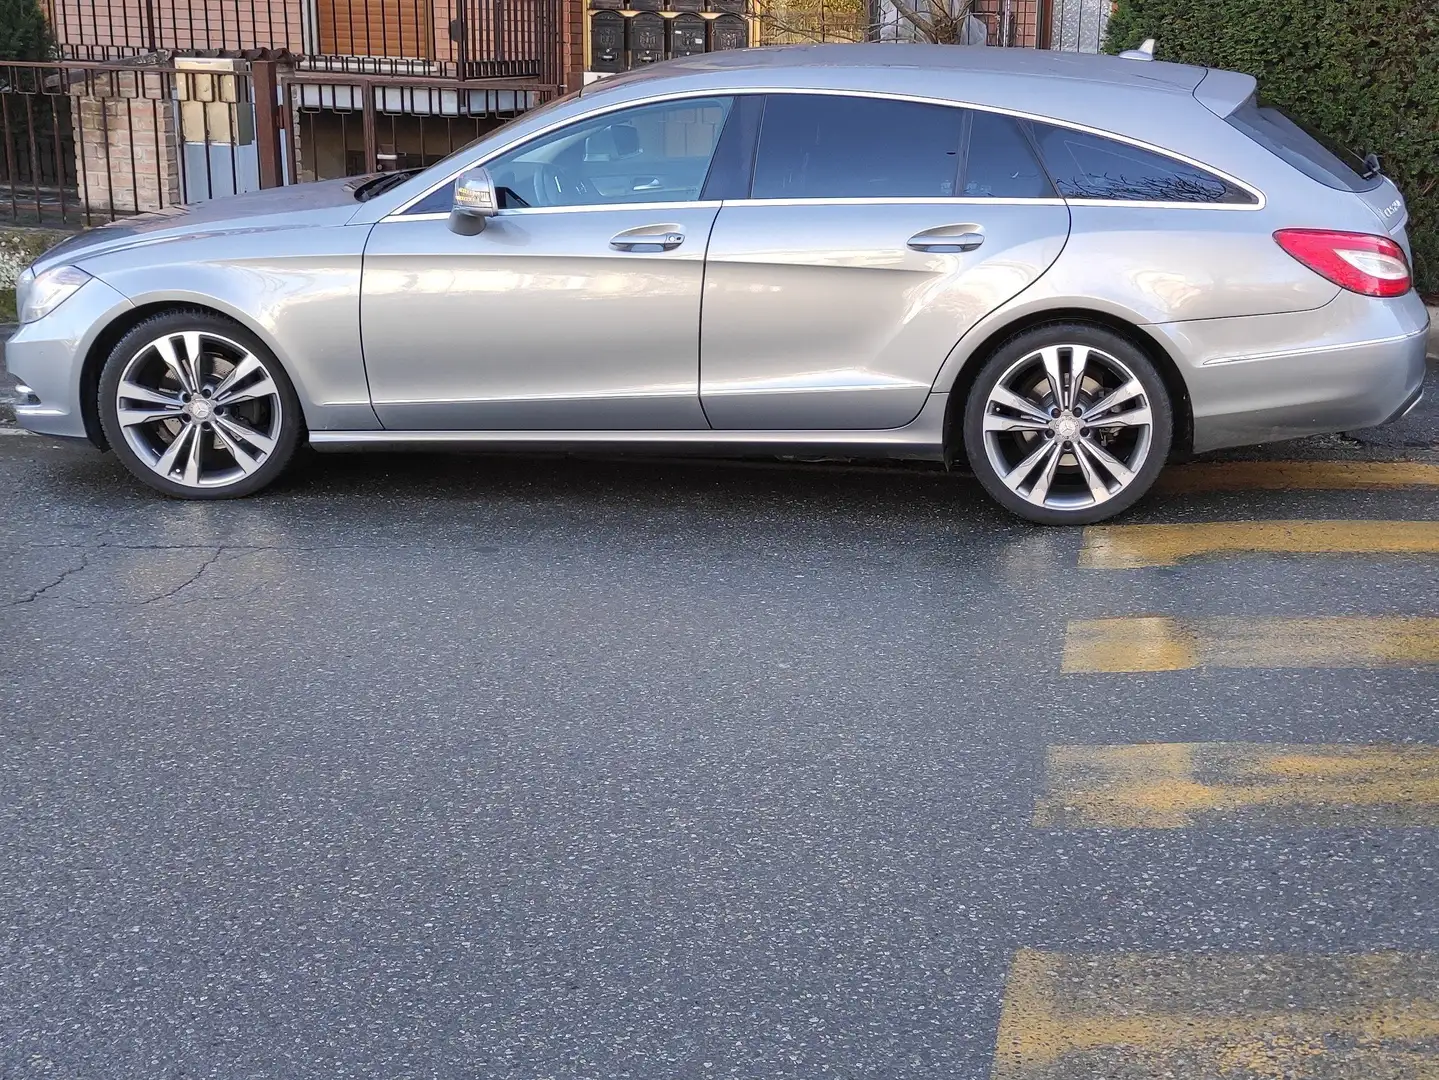 Mercedes-Benz CLS 250 CLS Shooting Brake 250 cdi be auto - 2